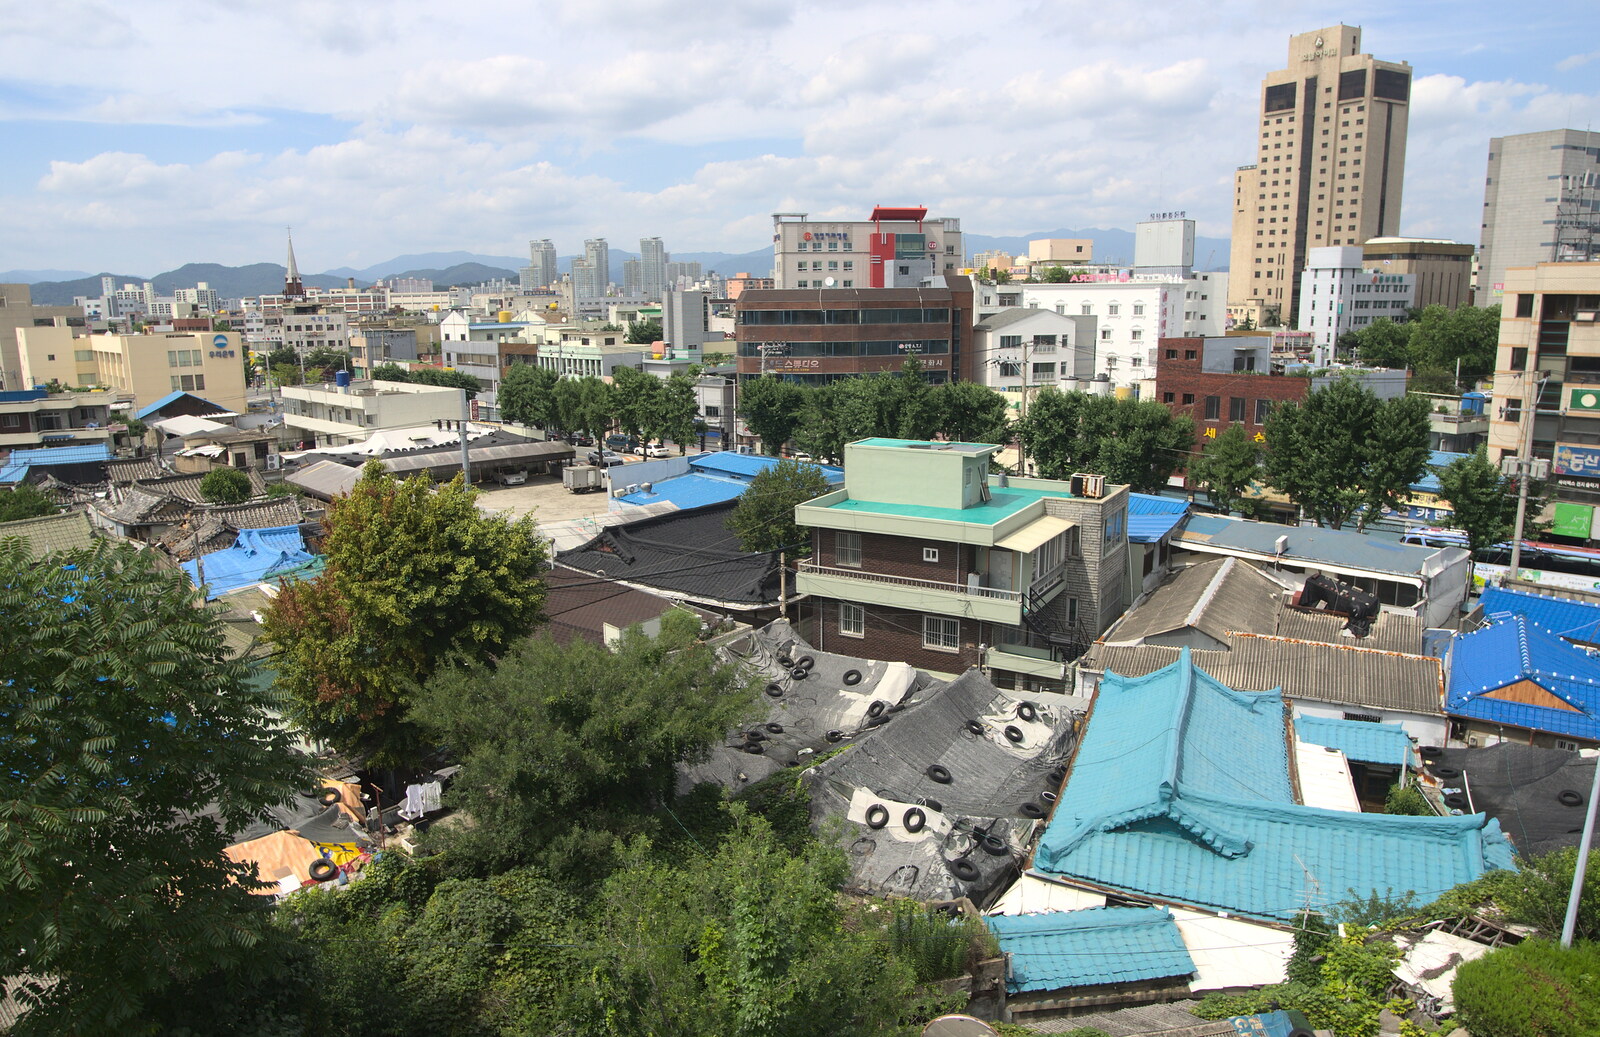 Looking out over the roofs of Daegu from Seomun Market, Daegu, South Korea - 1st July 2012